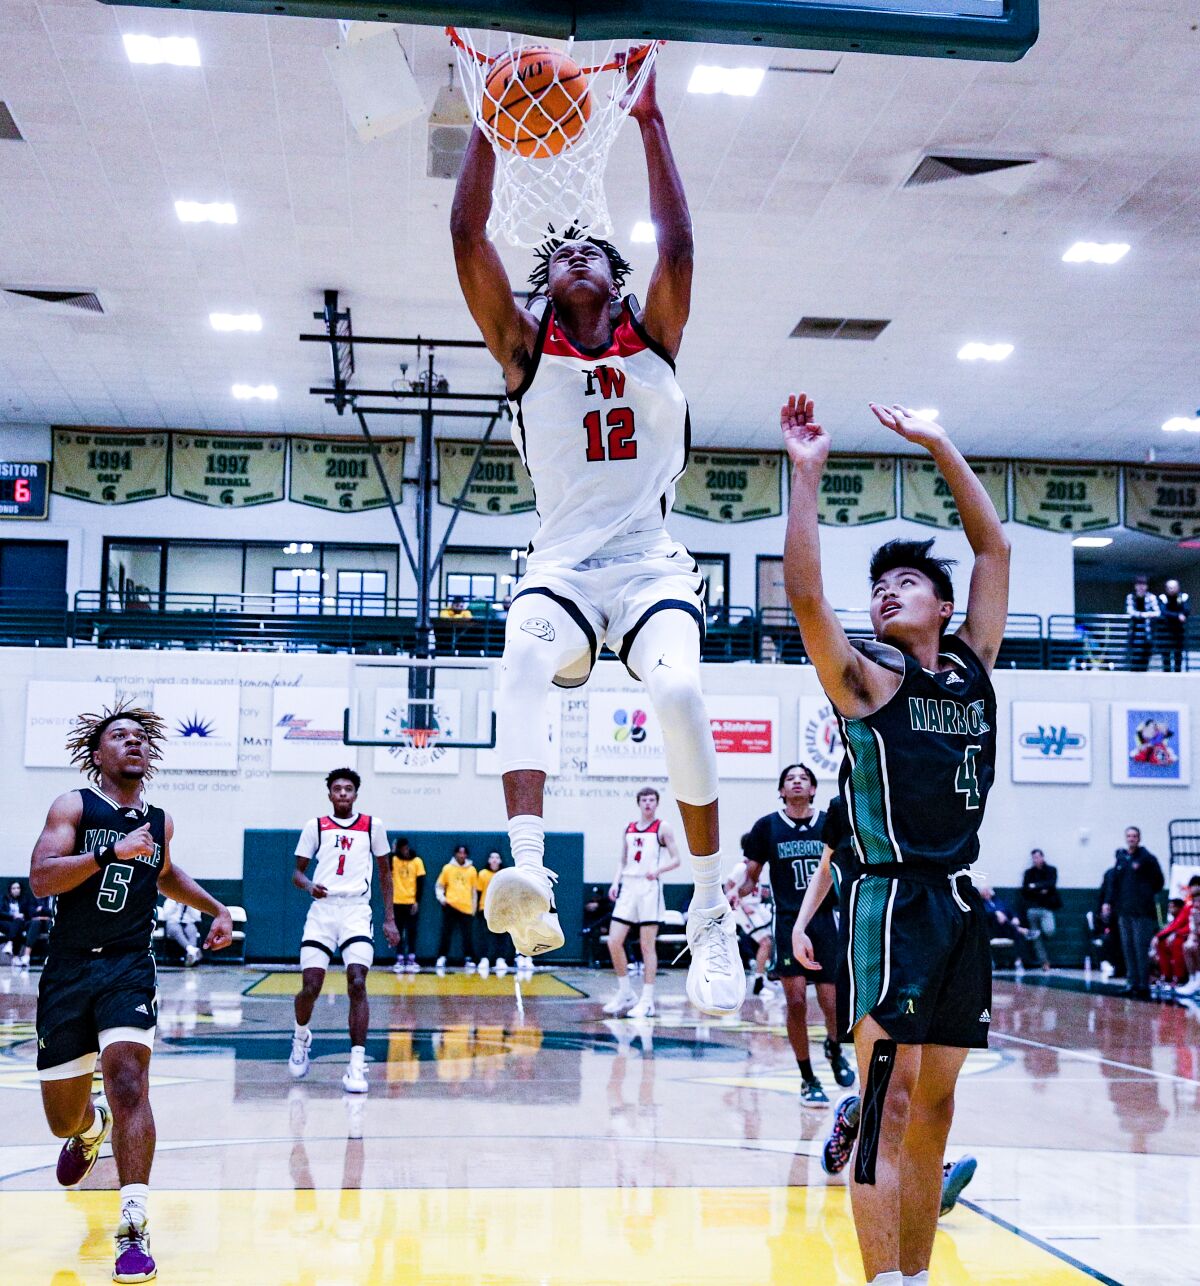 Jacob Huggins of Harvard-Westlake with one of his several dunks against Narbonne.